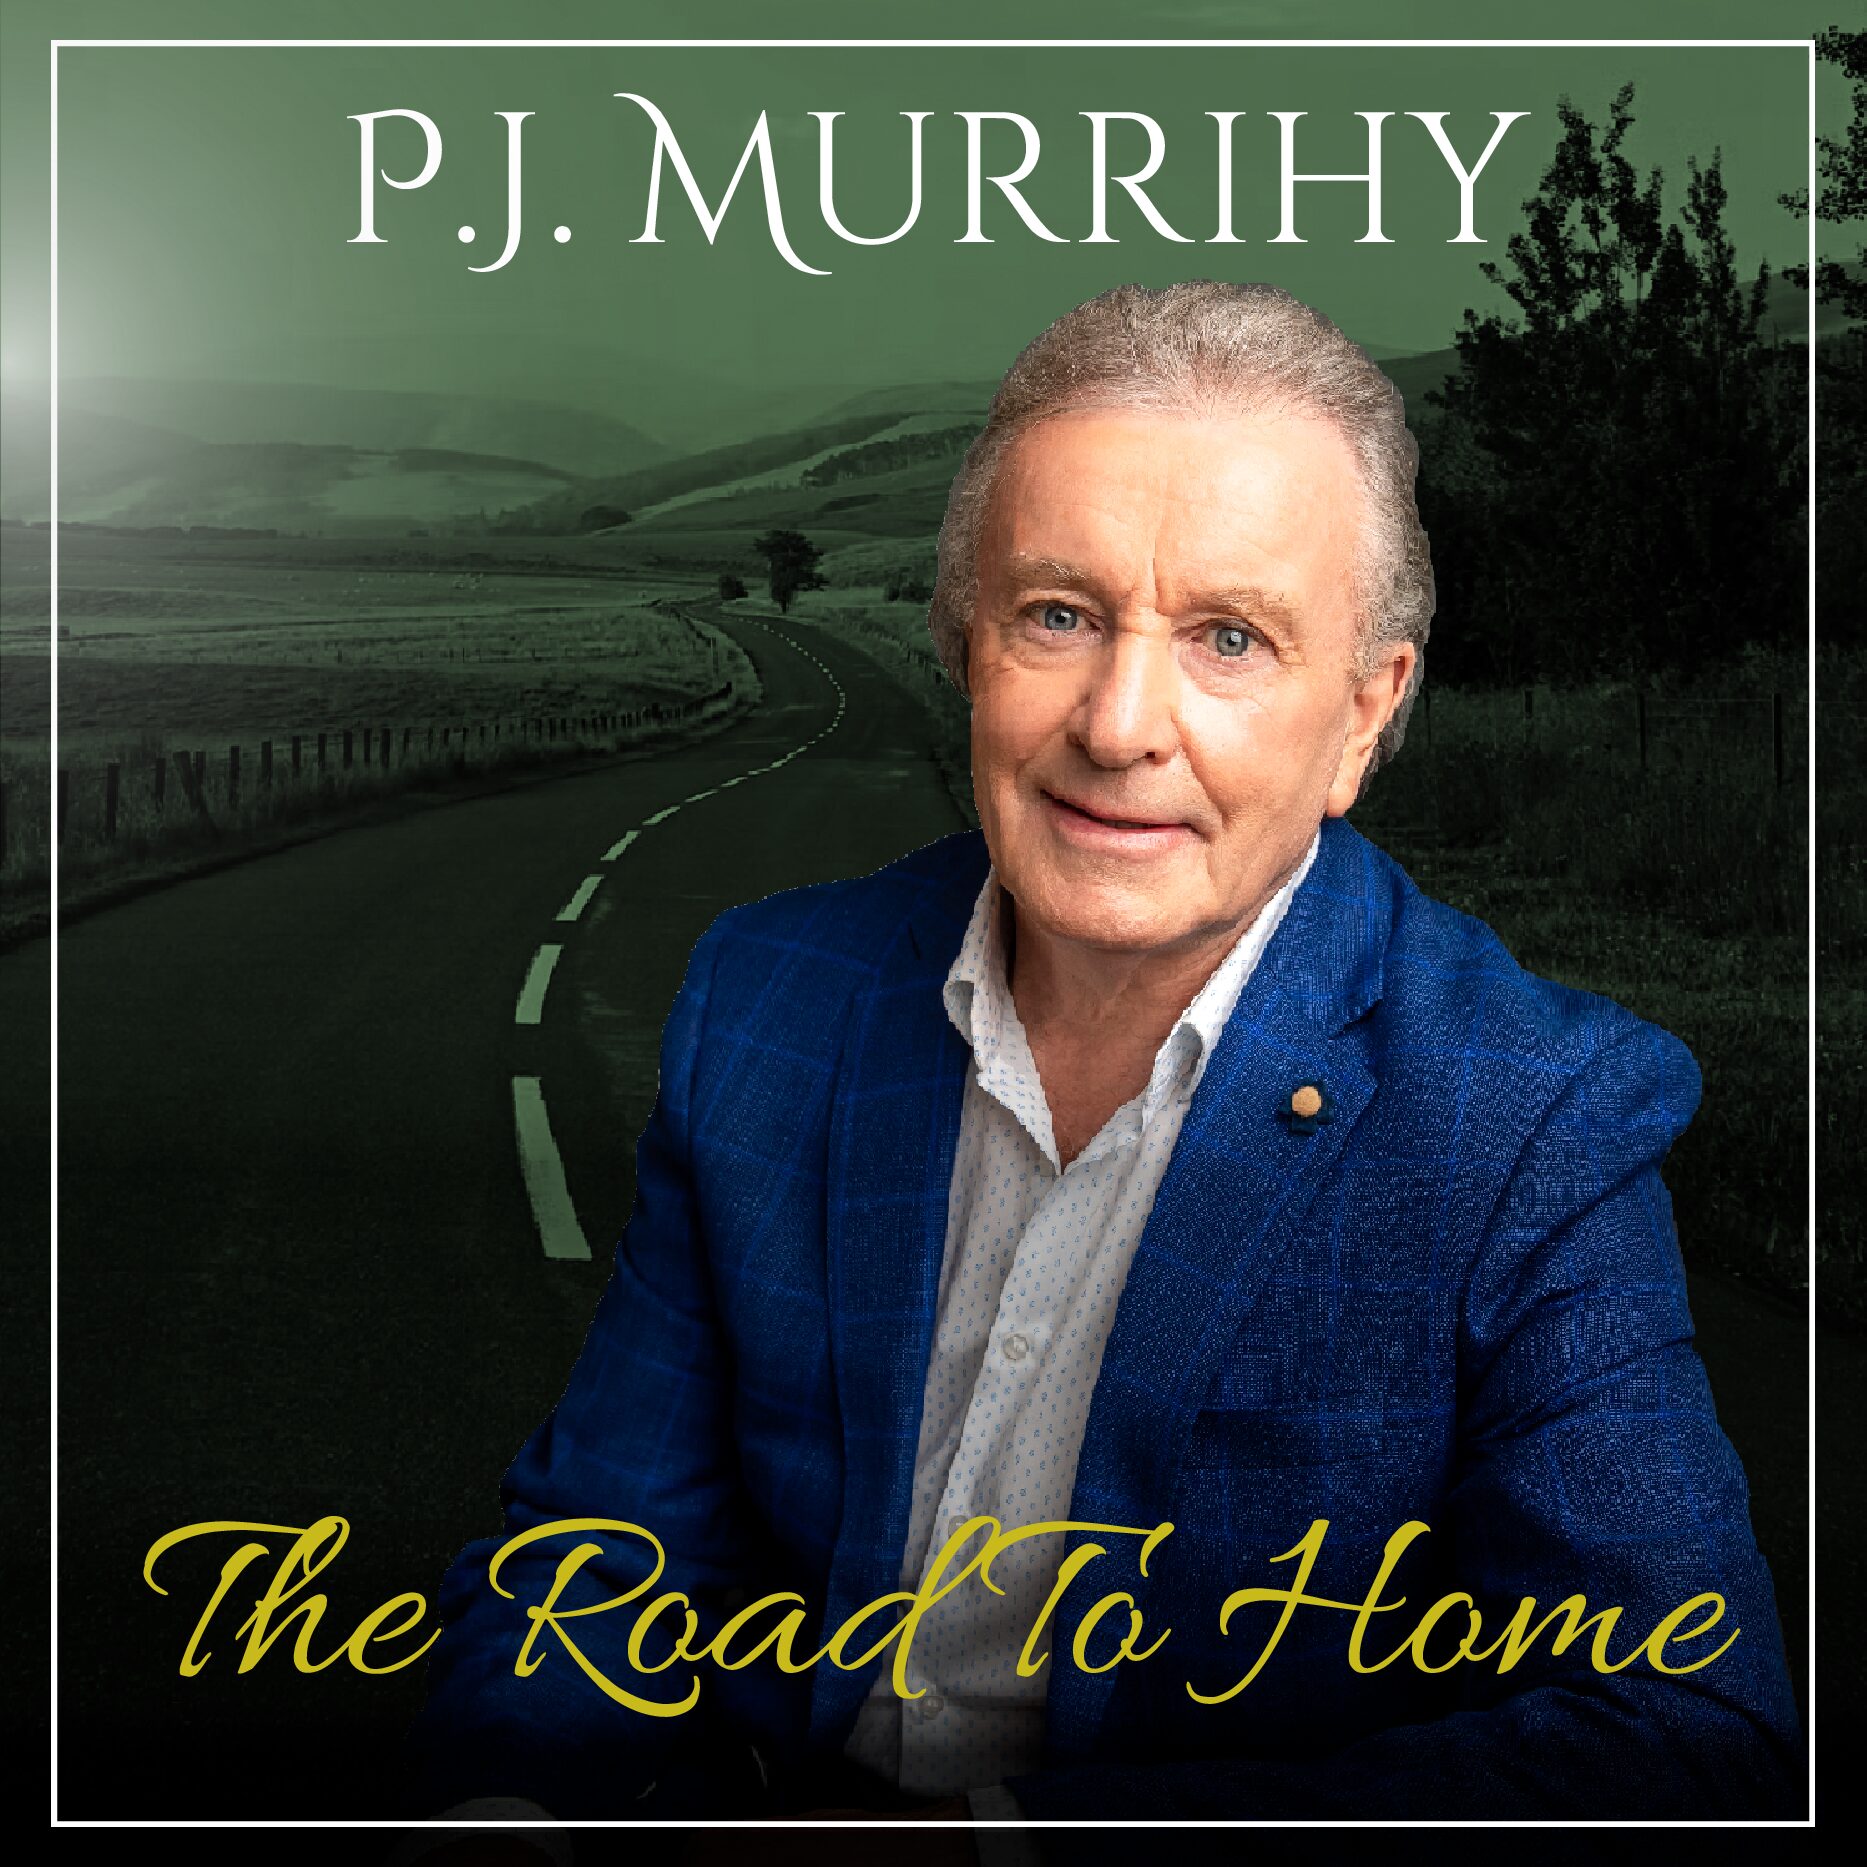 P.J. MURRIHY THE ROAD TO HOME FINAL